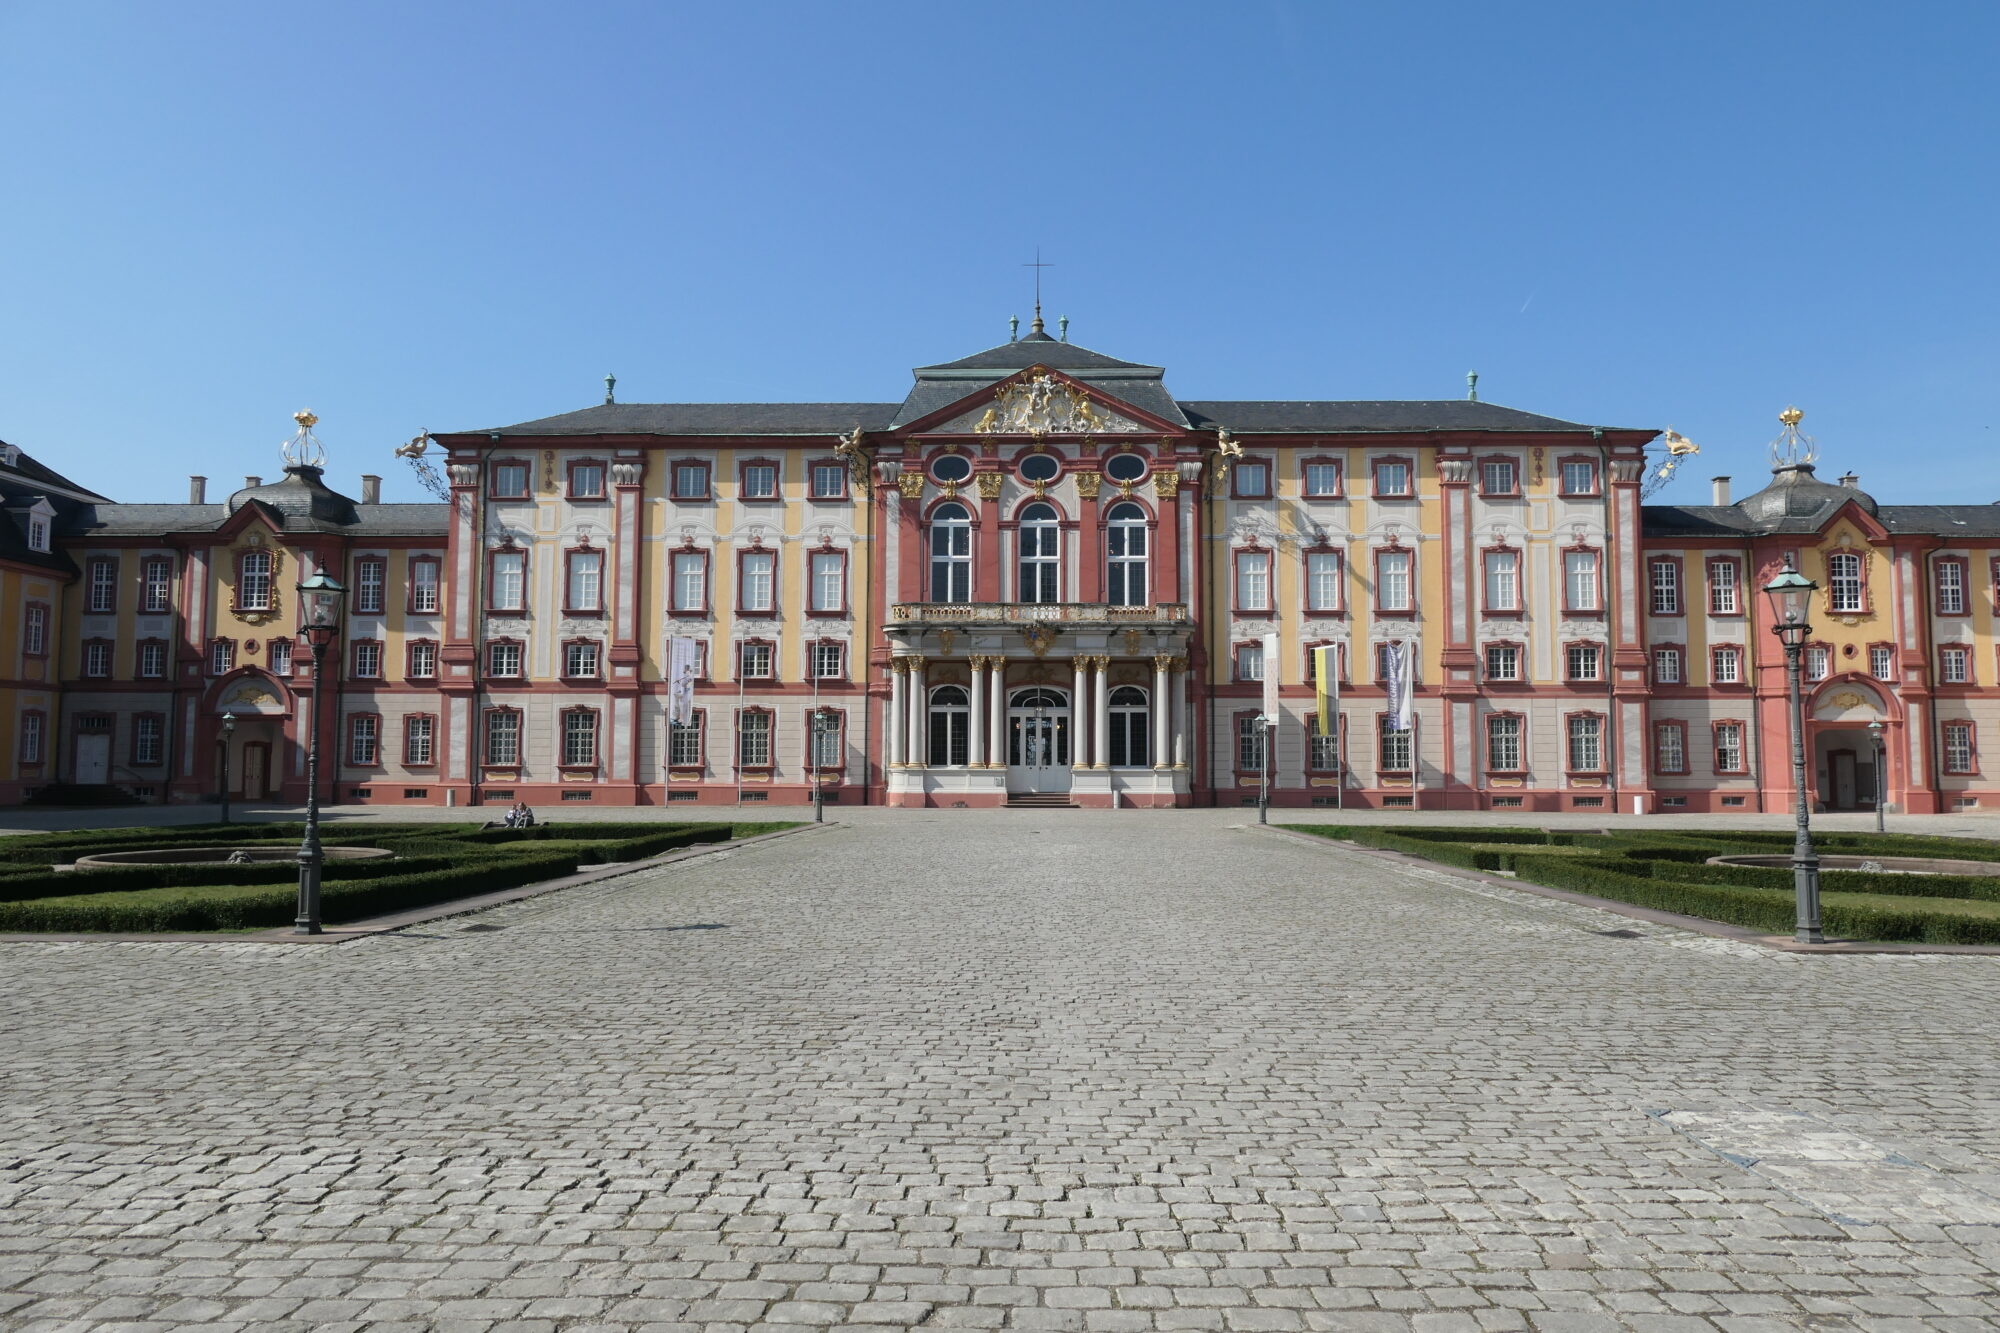 Palace: Bruchsal Palace, Damiansburg, A Baroque palace complex located in Bruchsal, Germany. 2000x1340 HD Wallpaper.